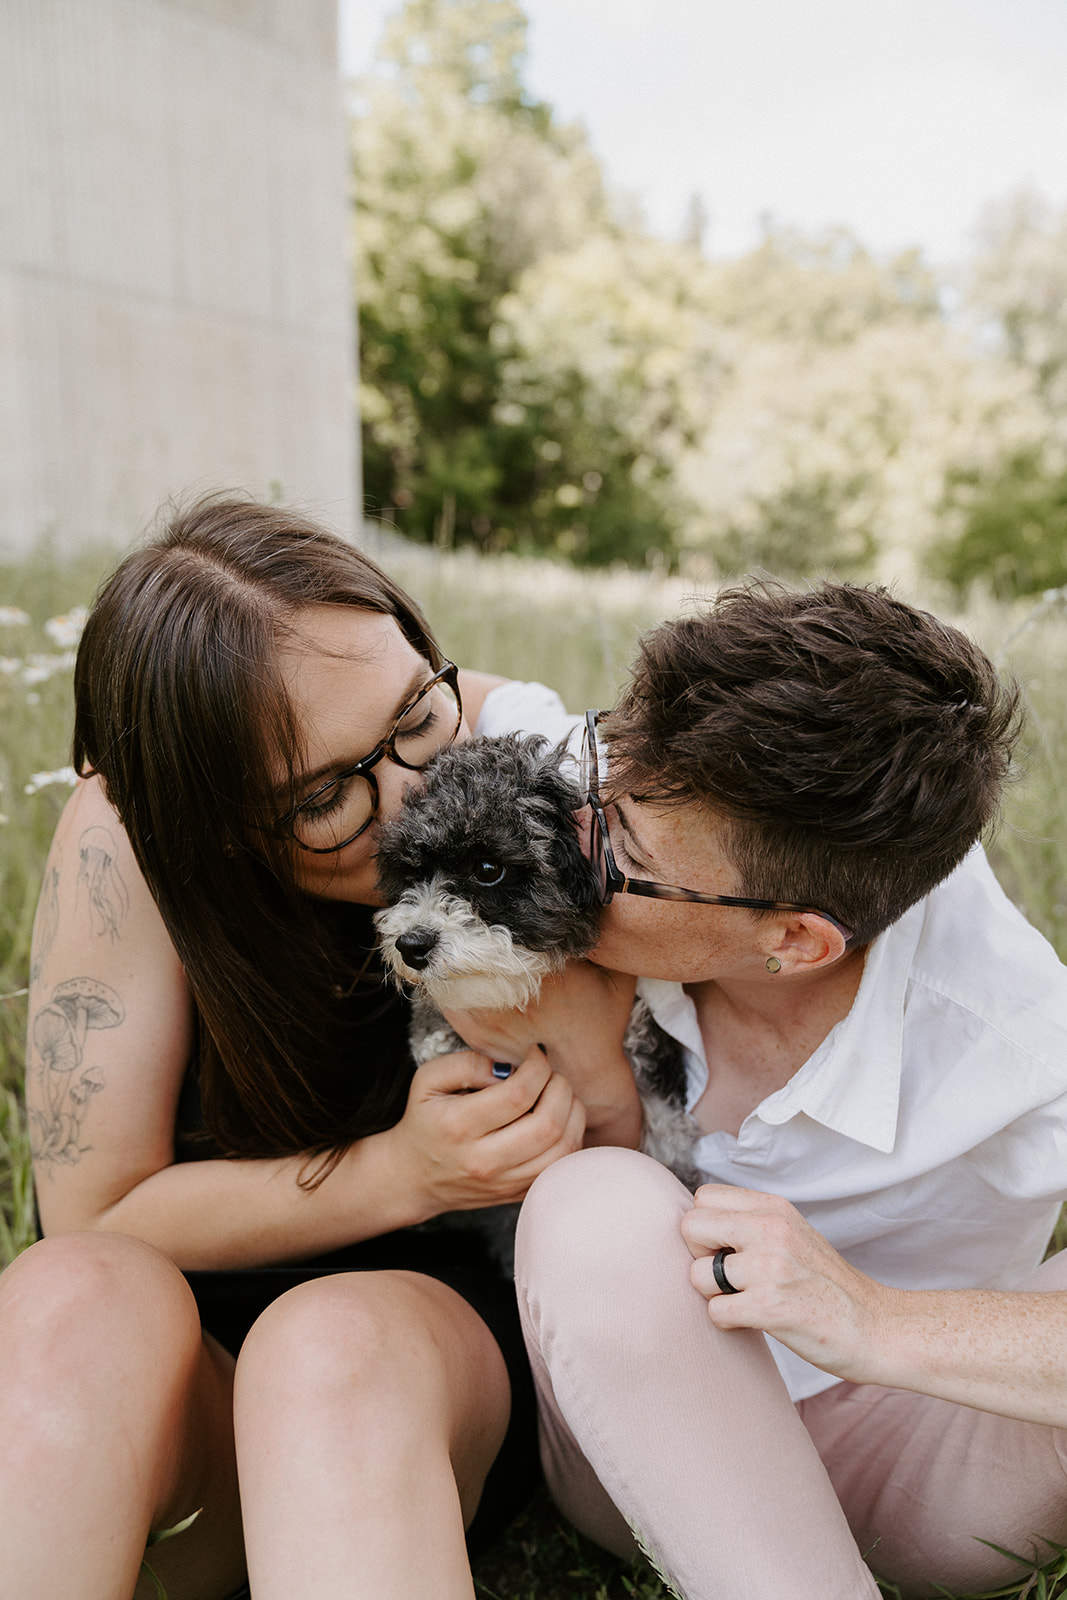 Two people sitting on the grass both kissing the dog between them.